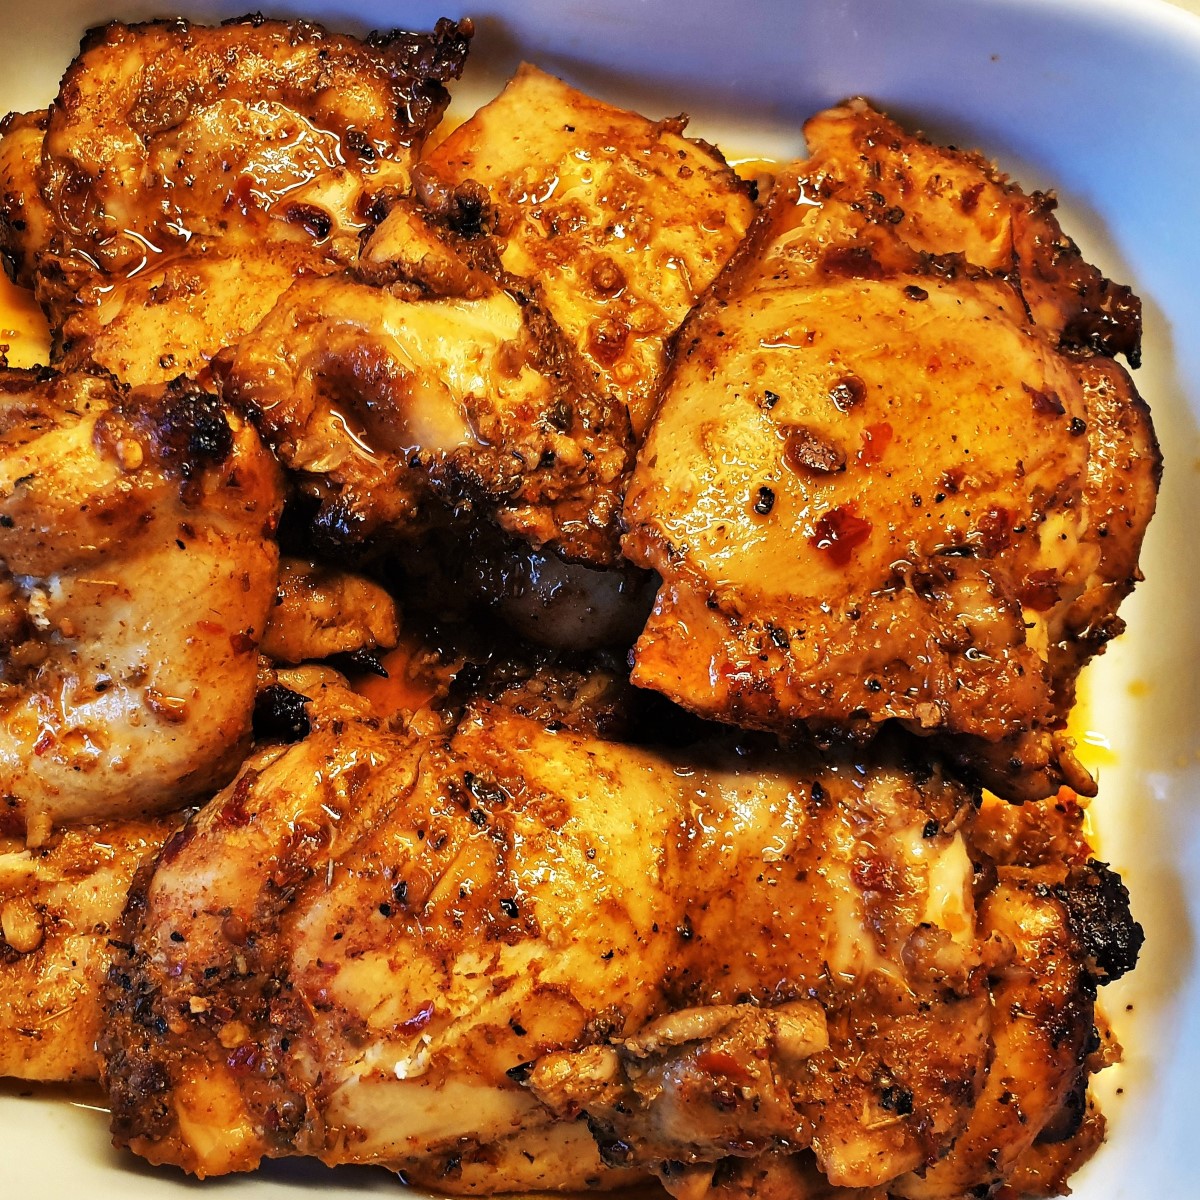 A dish of cooked oven-baked chicken thighs